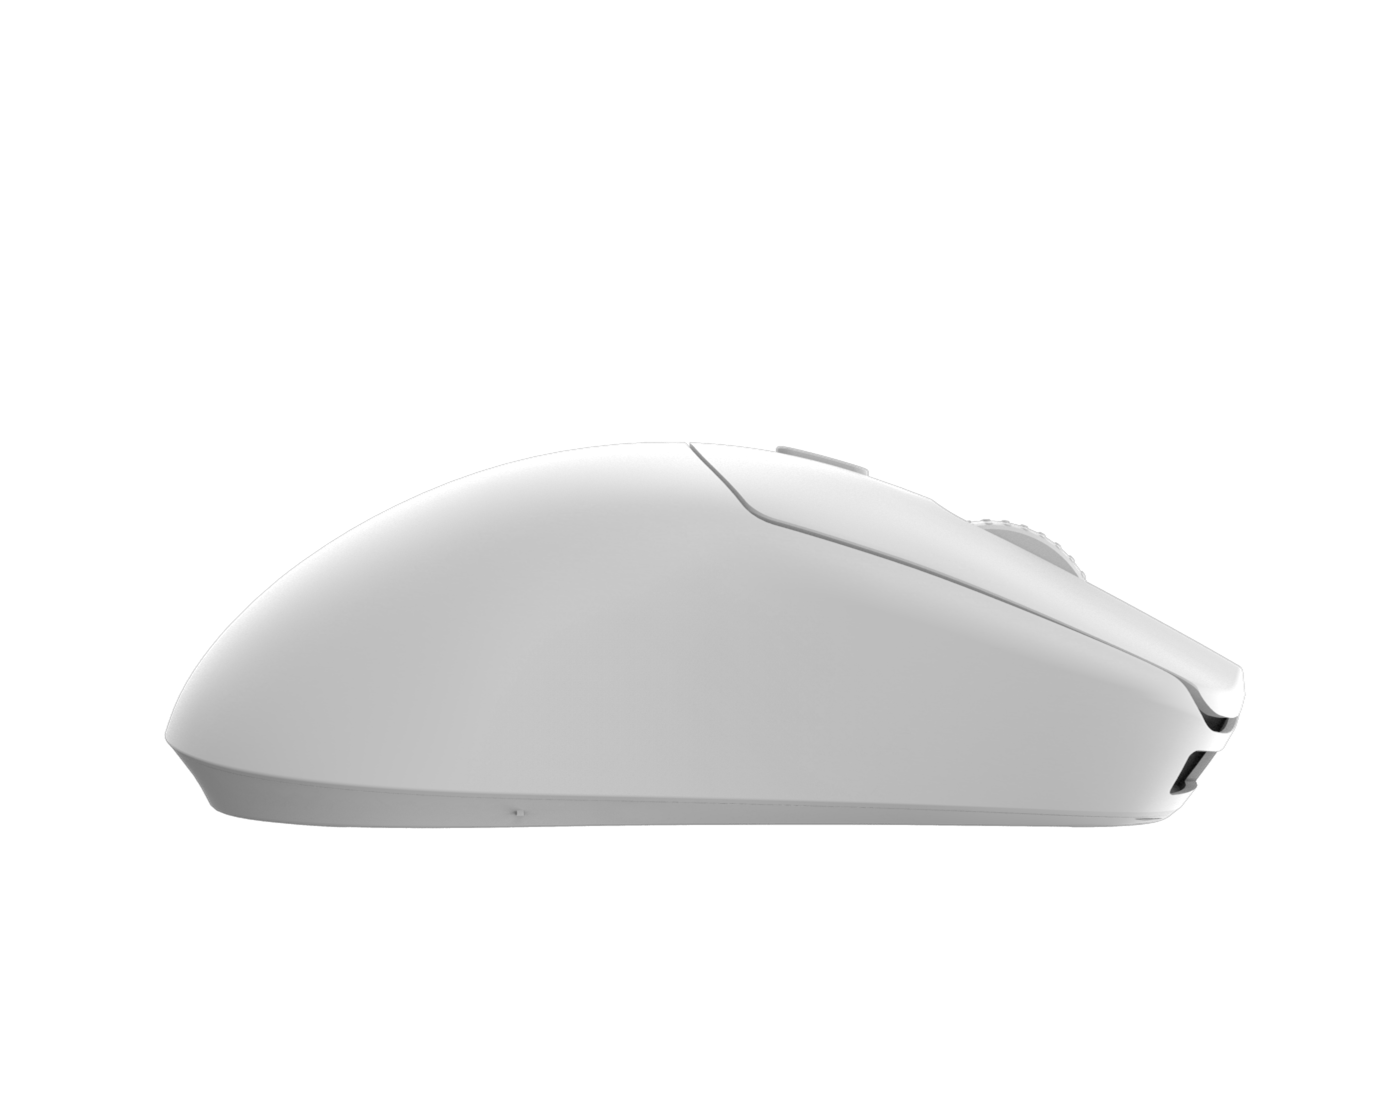 G-Wolves HTS Plus ( HTS+ ) Classic Wireless Gaming Mouse